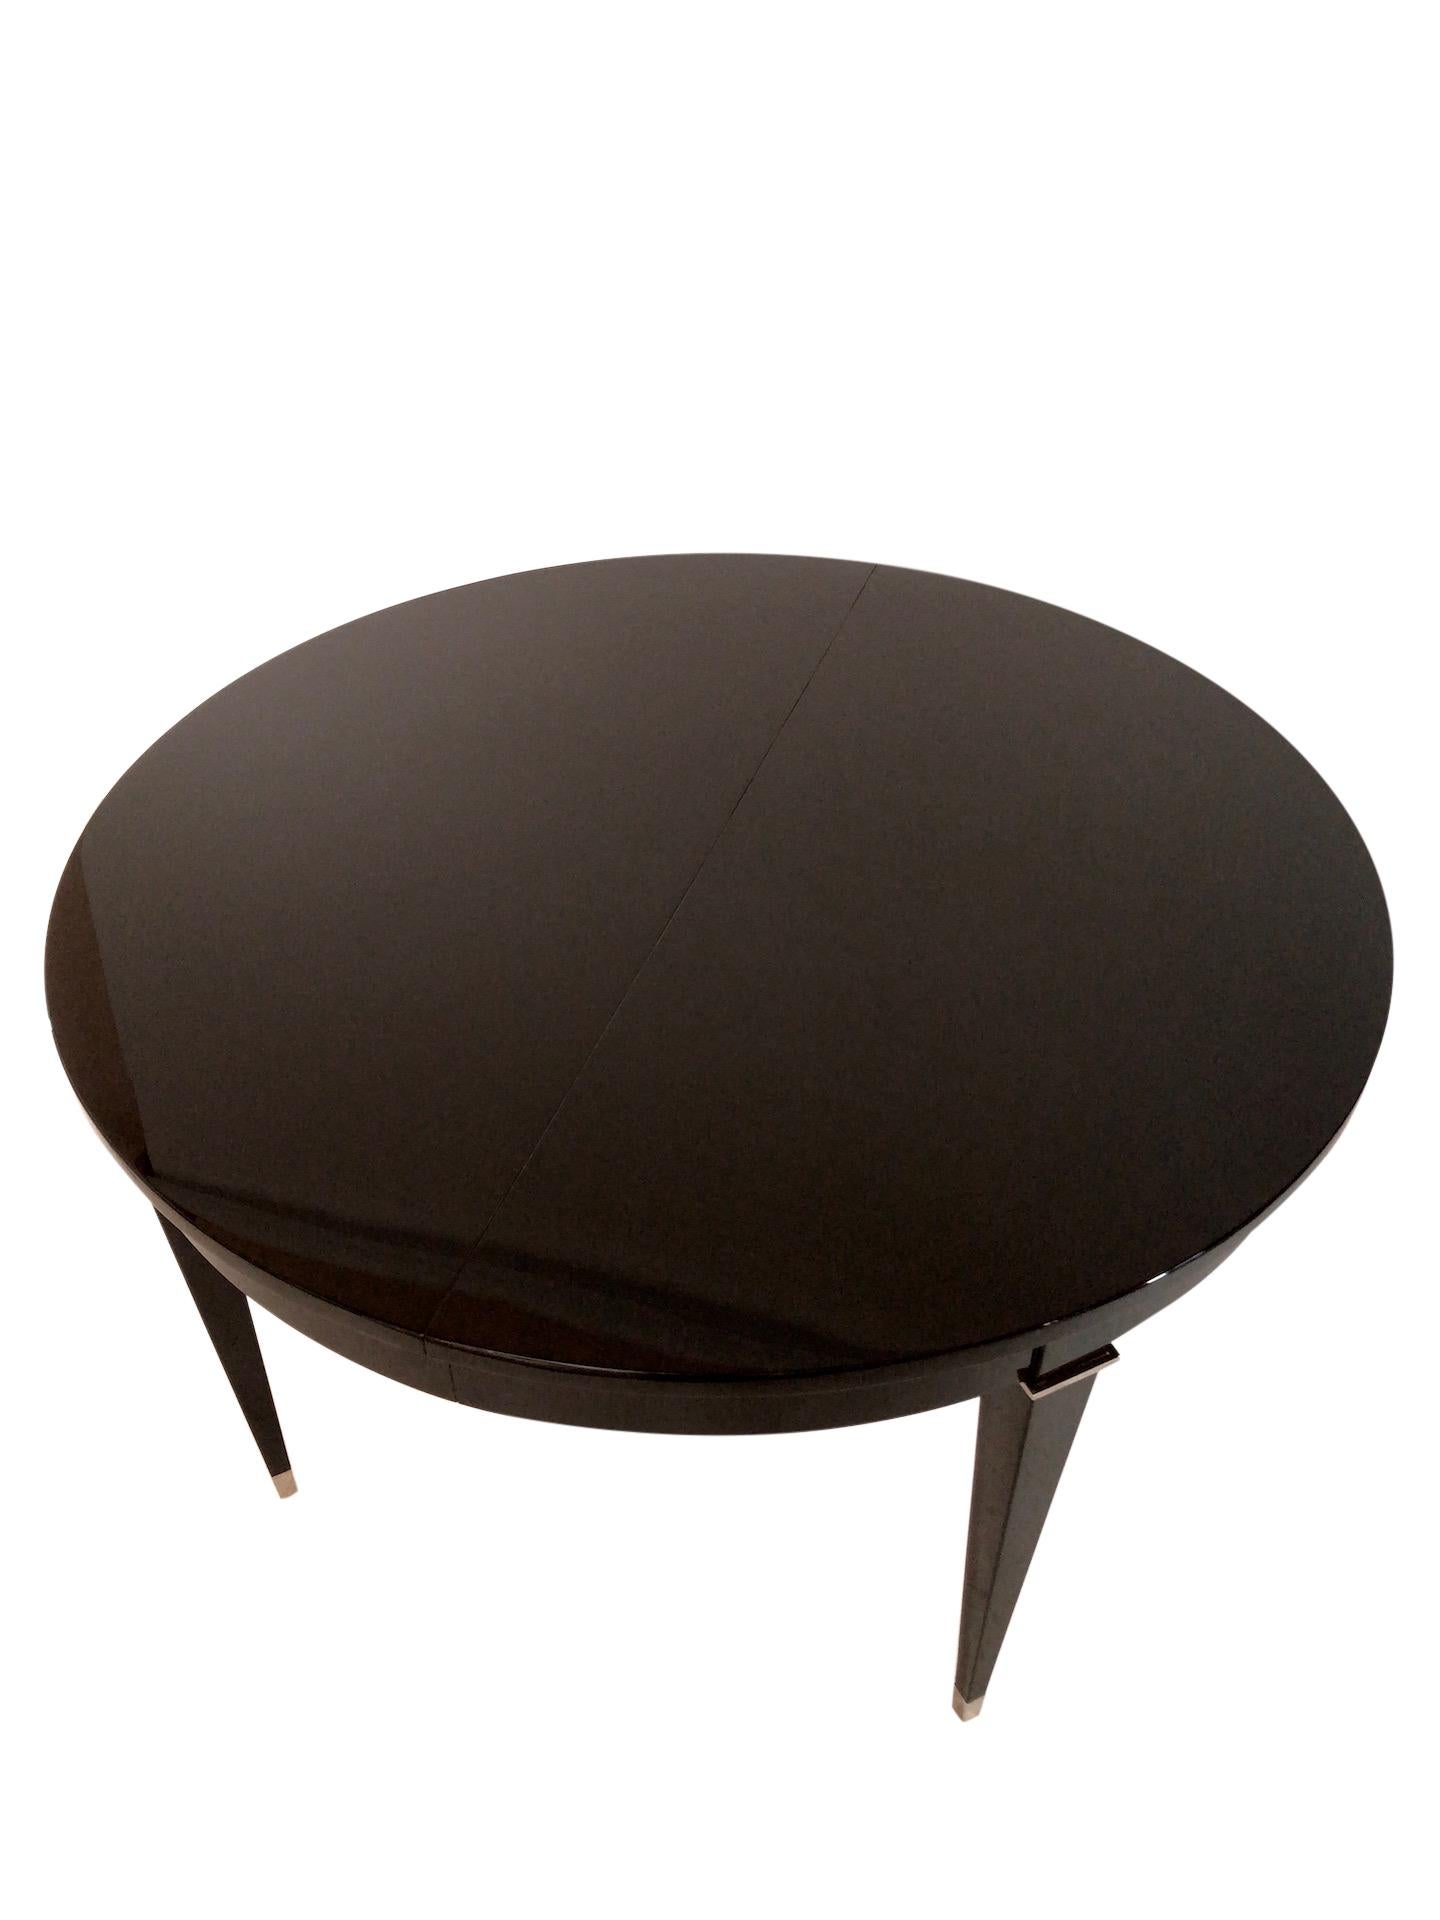 Art Deco Round Dining Table with Extension in Black Lacquer with Nickeled Metal Fittings For Sale